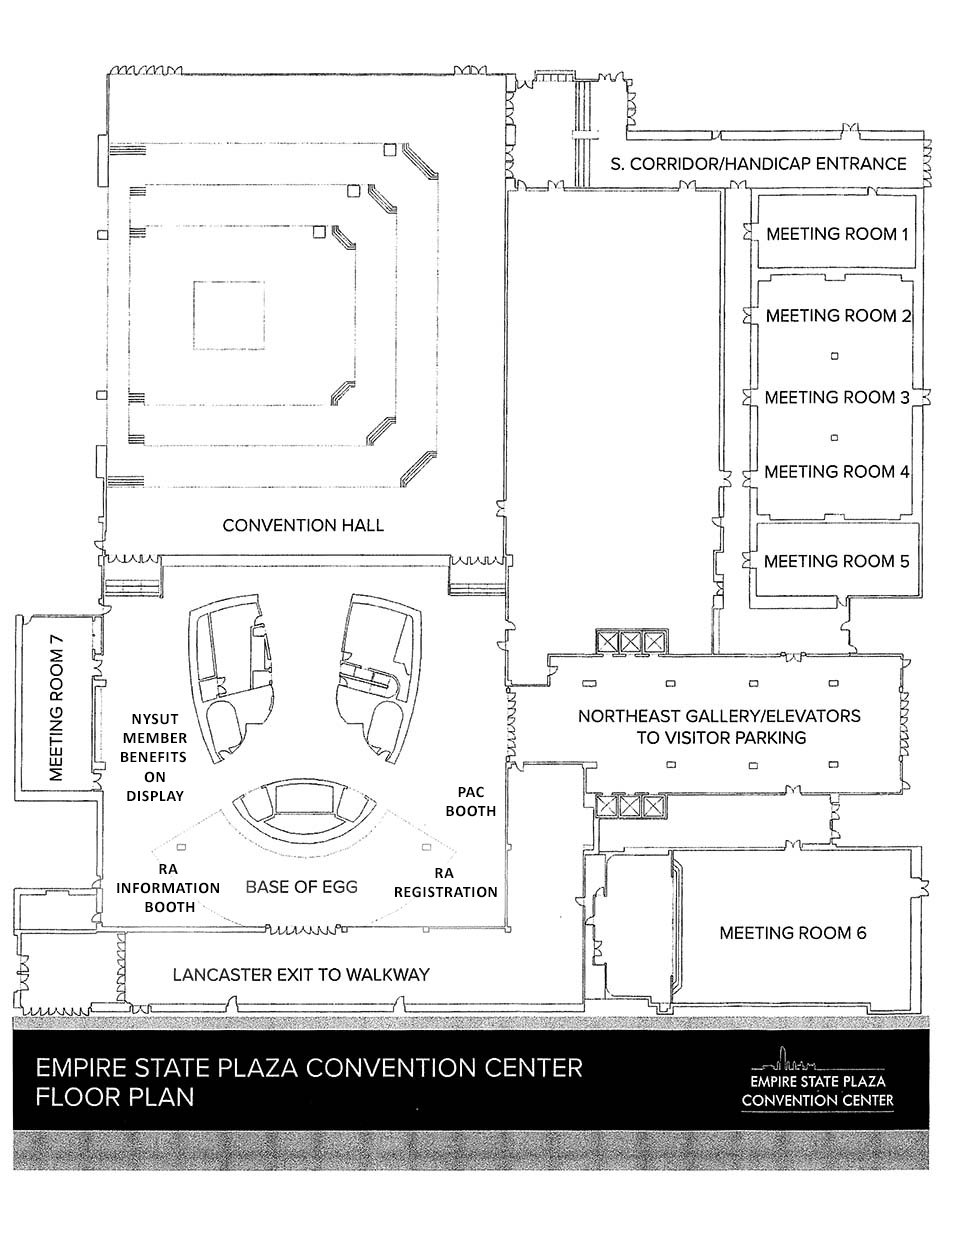 convention center map